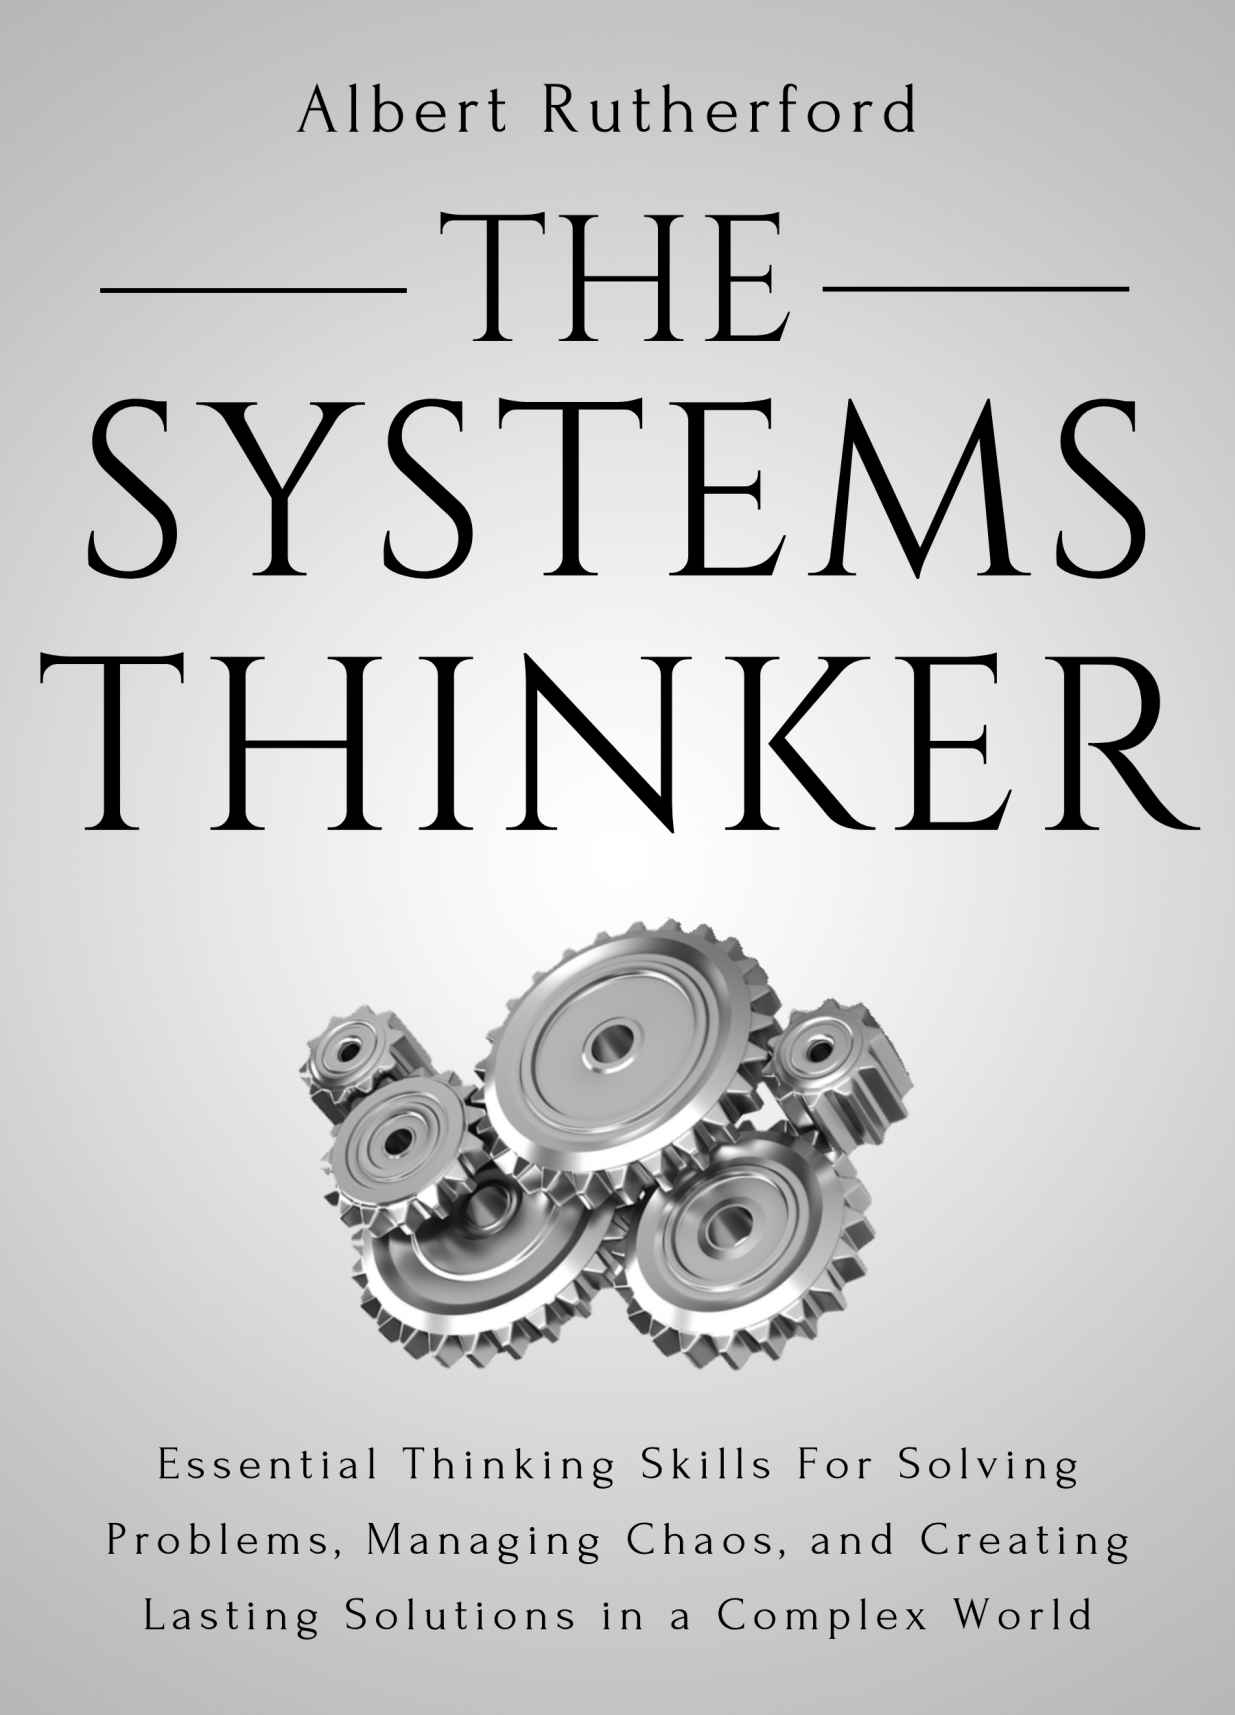 The Systems Thinker: Essential Thinking Skills For Solving Problems, Managing Chaos, and Creating Lasting Solutions in a Complex World (The Systems Thinker Series Book 1)